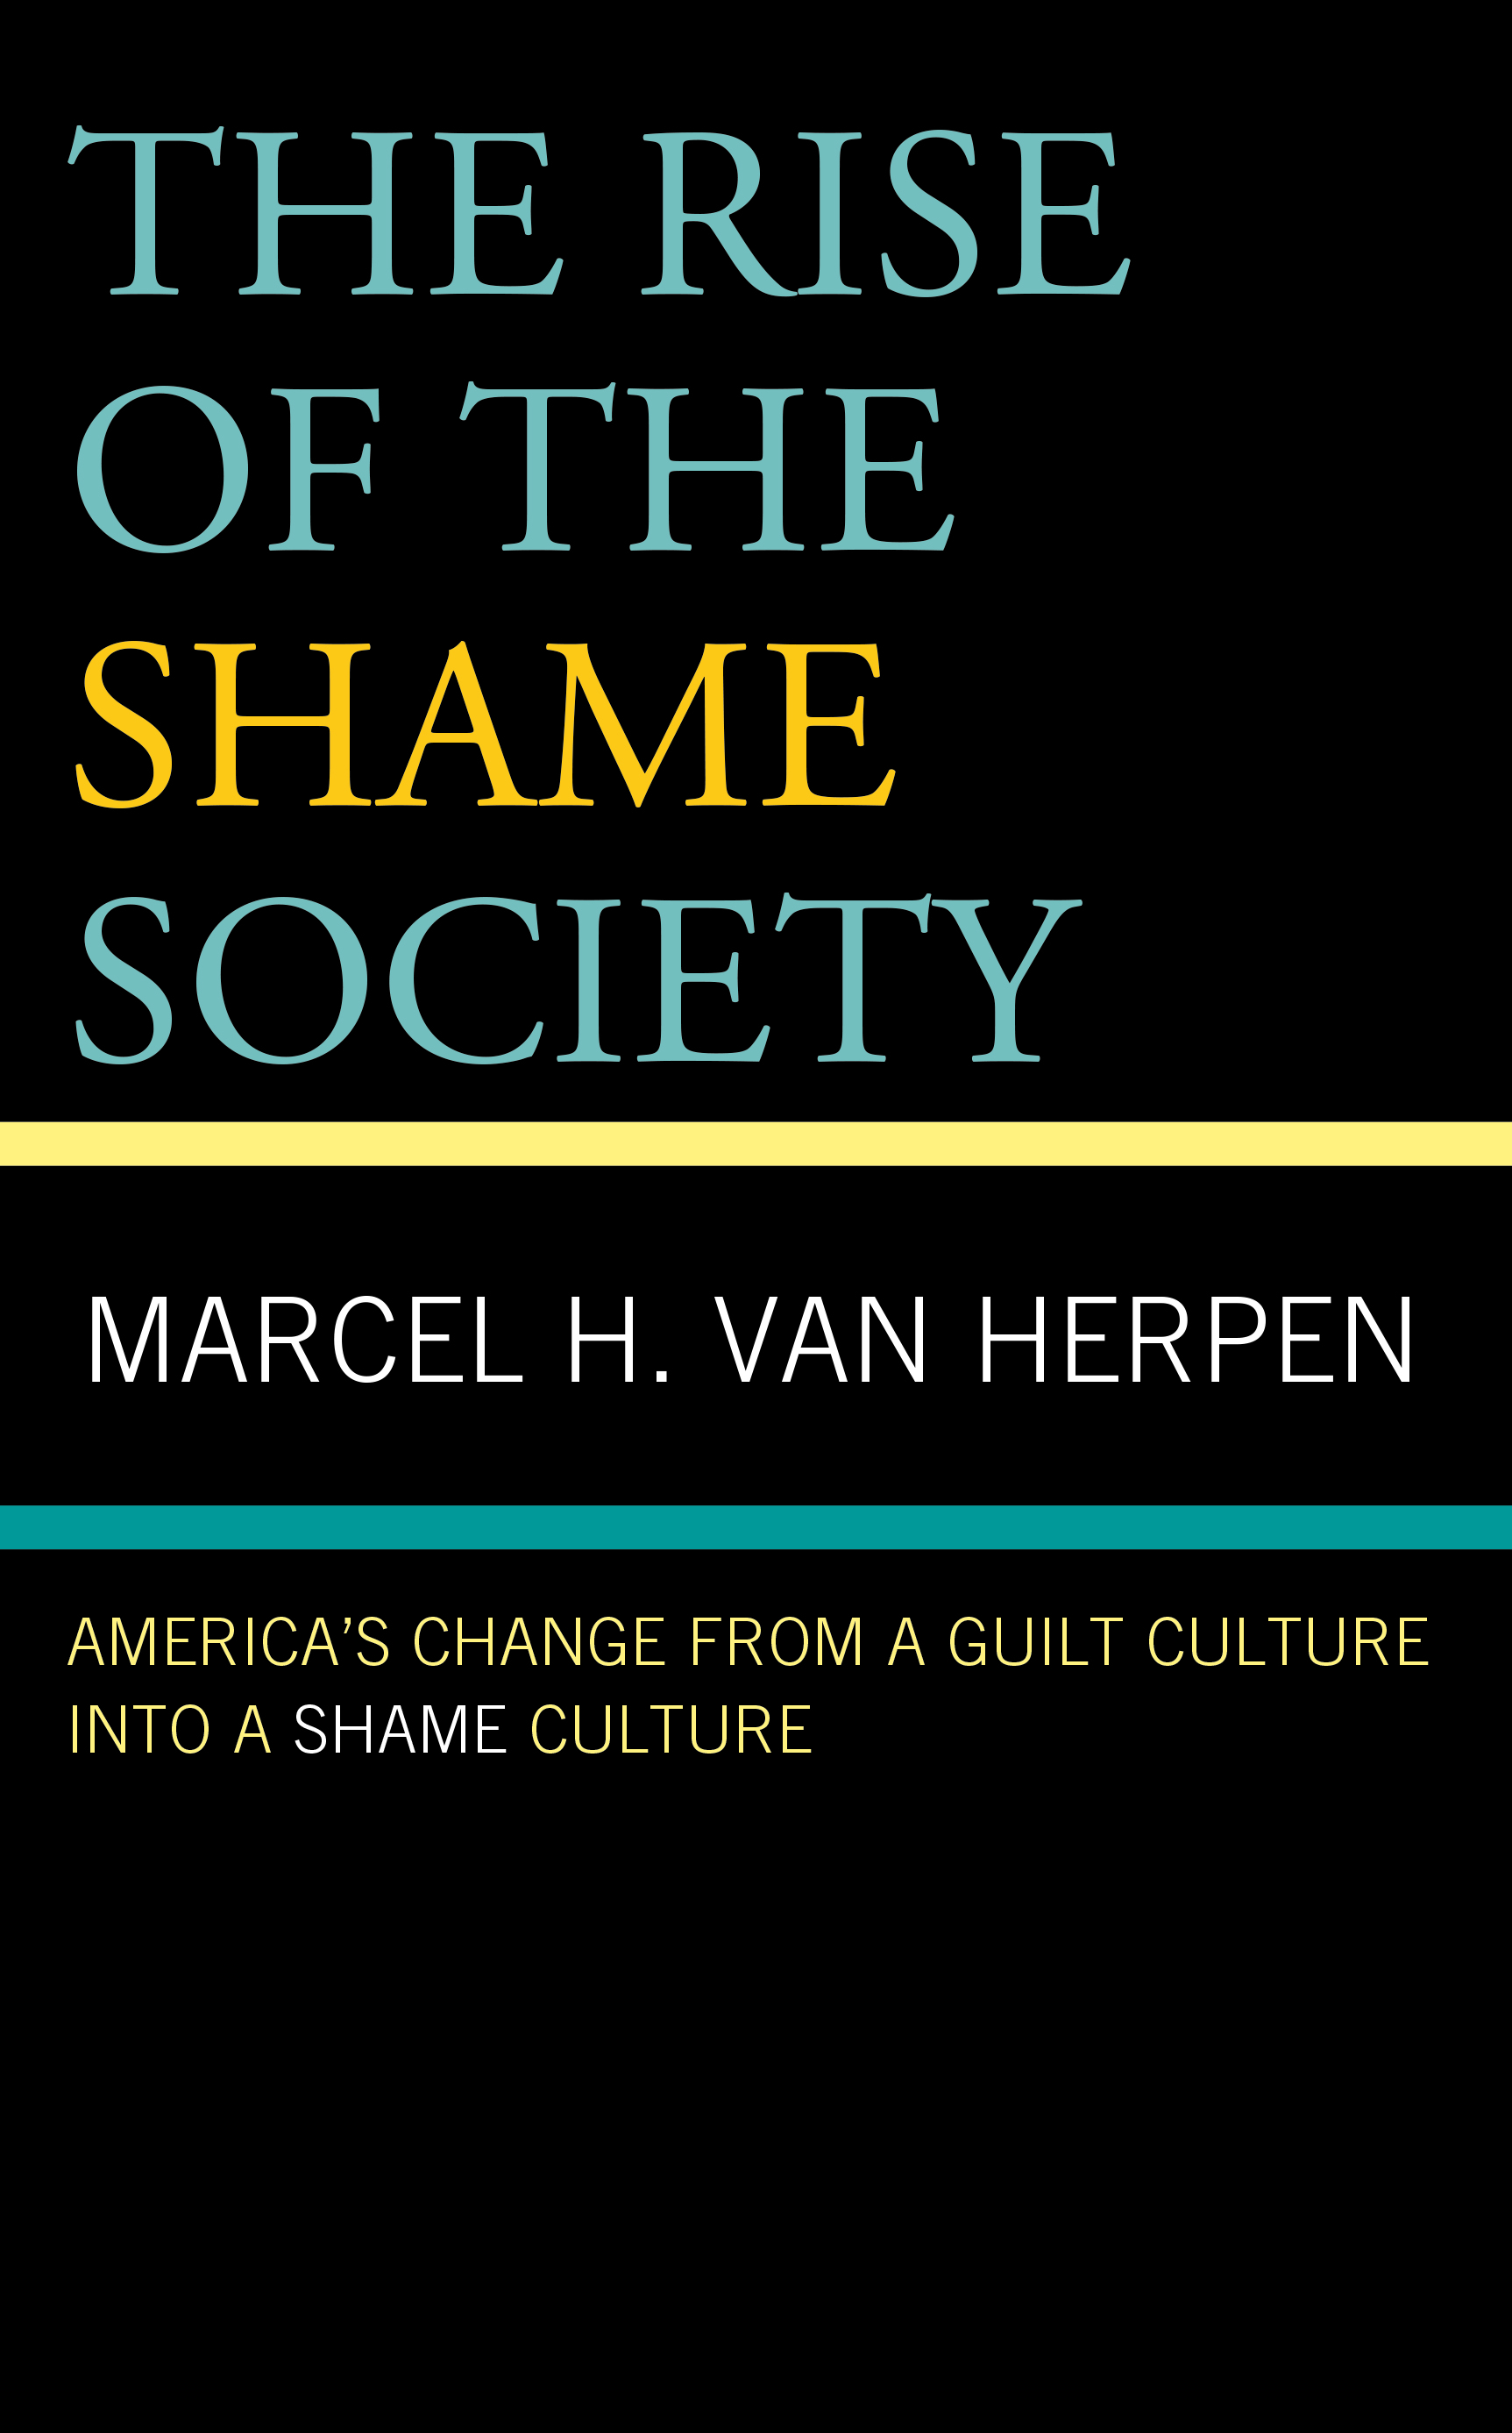 The Rise of the Shame Society: America’s Change from a Guilt Culture into a Shame Culture